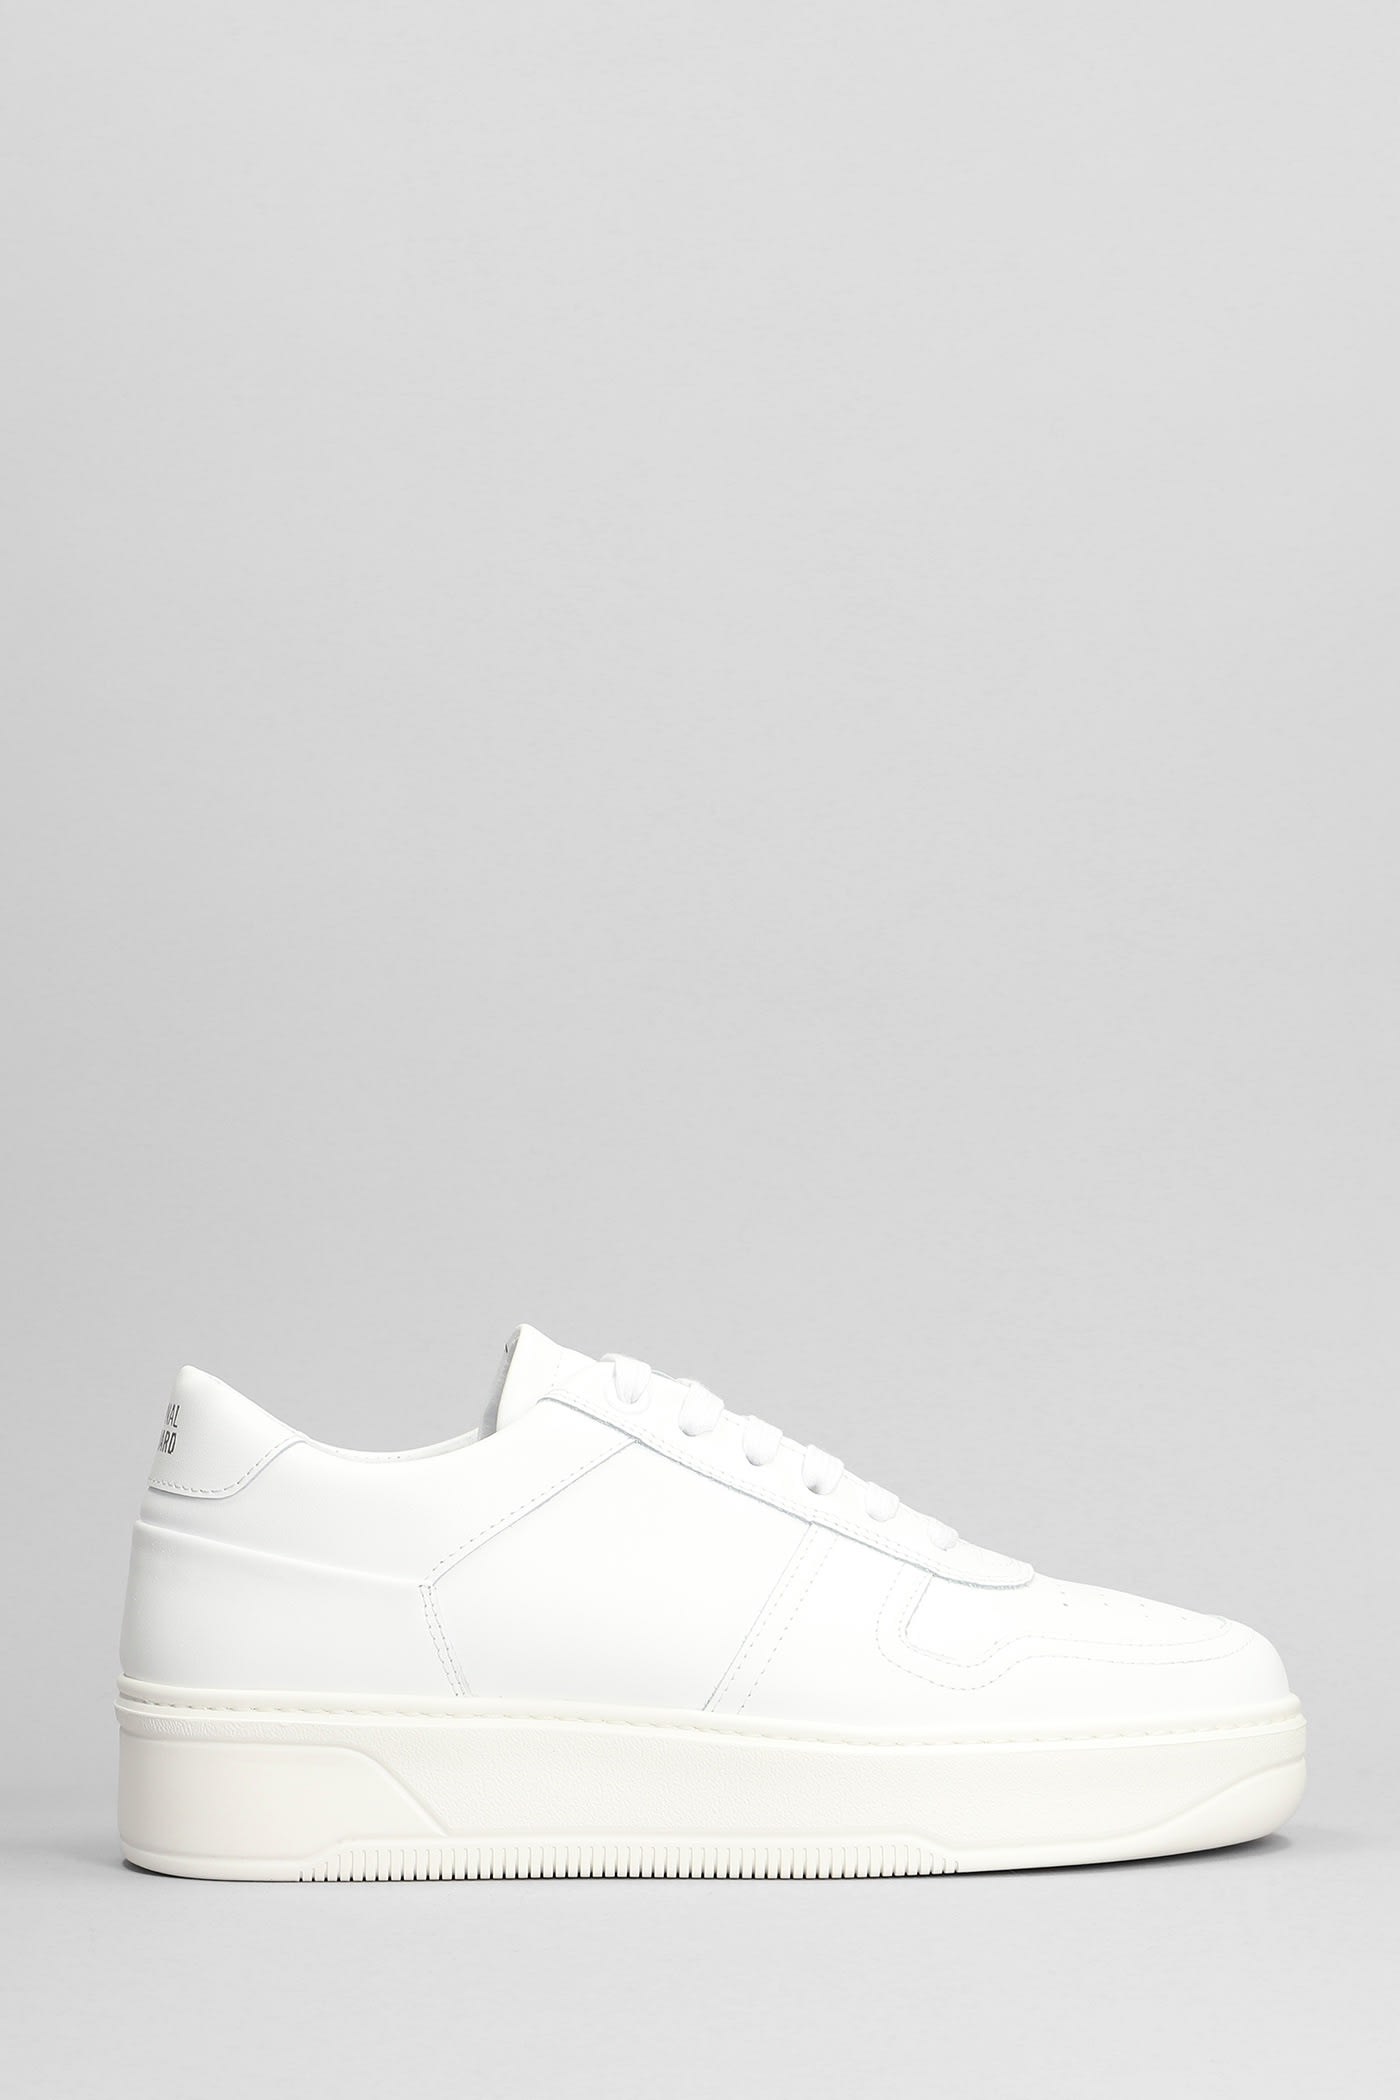 Edition 11 Low Sneakers In White Leather